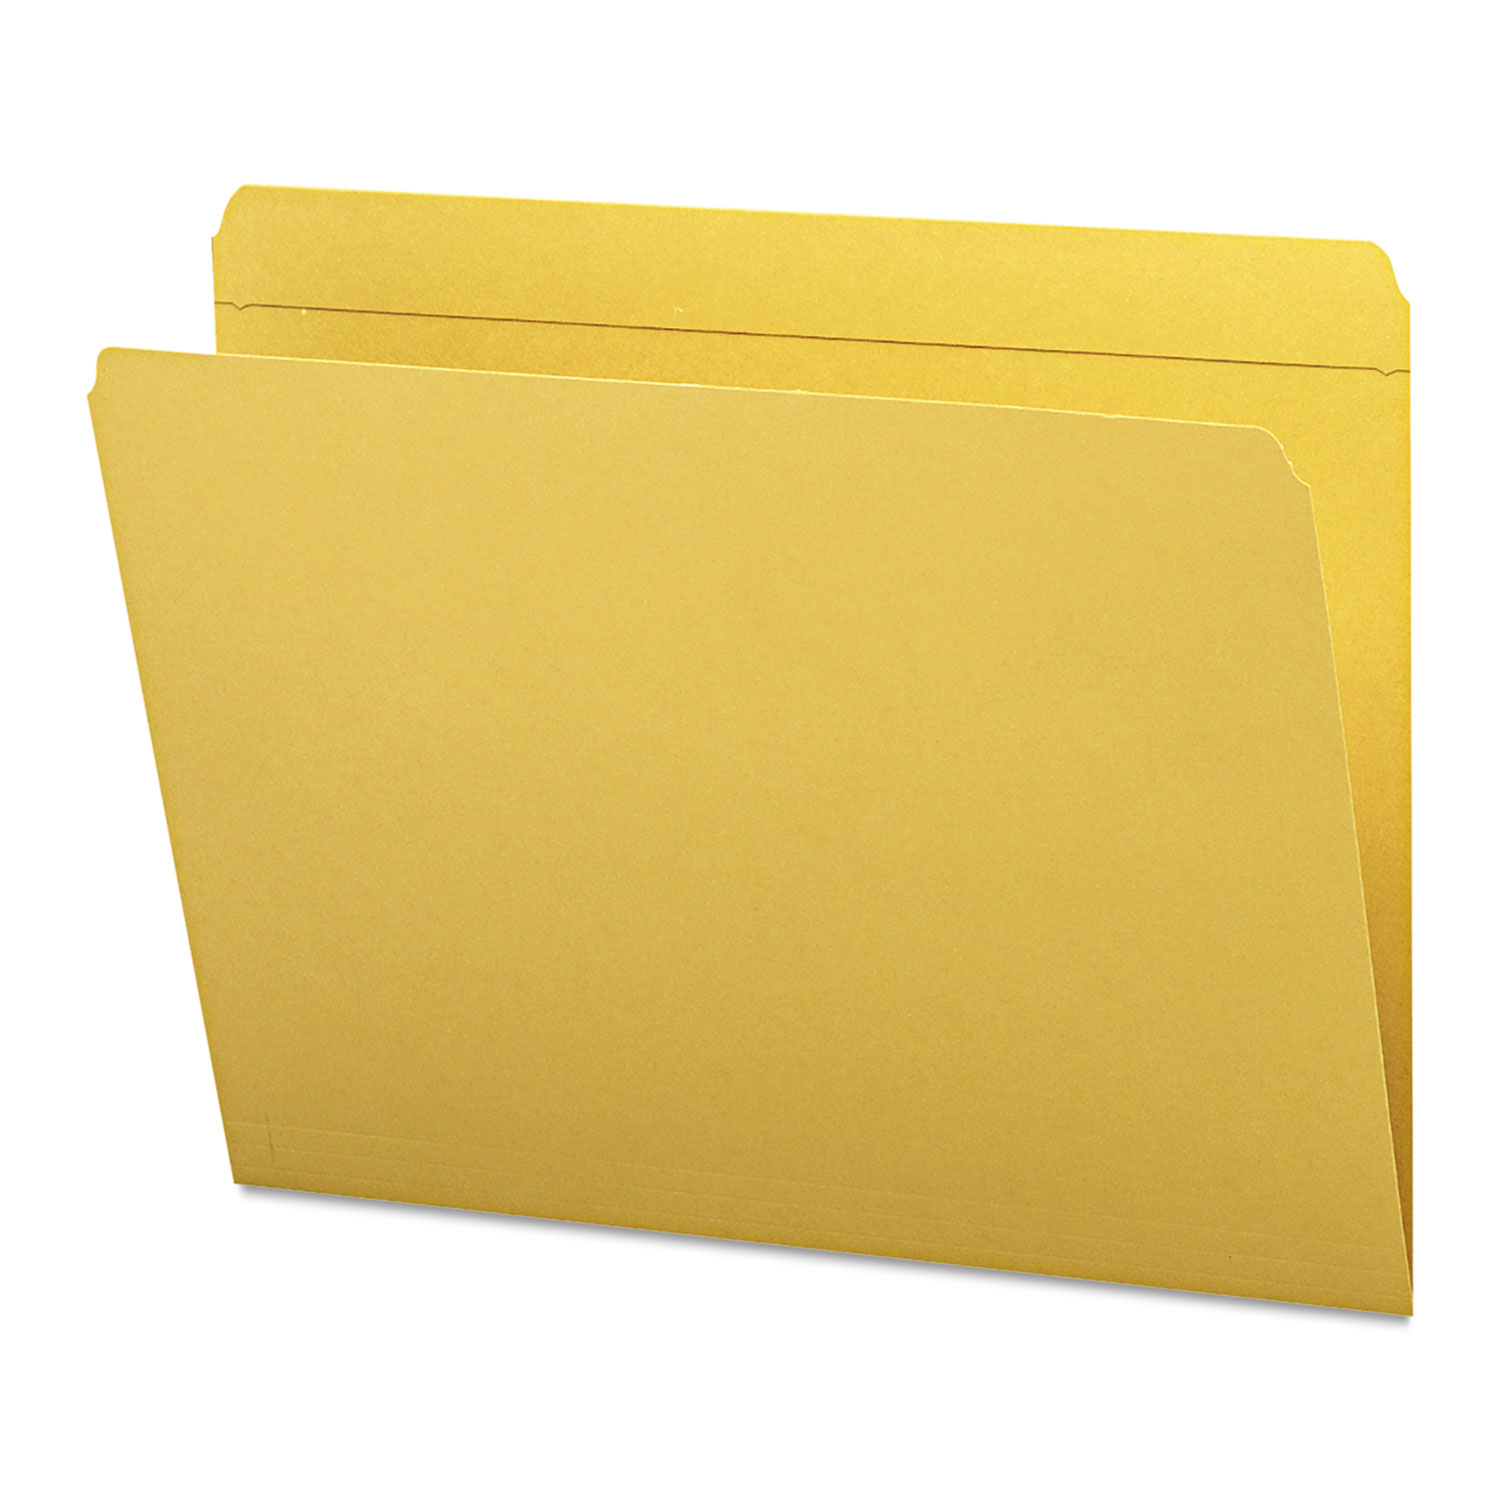  Smead 12210 Reinforced Top Tab Colored File Folders, Straight Tab, Letter Size, Goldenrod, 100/Box (SMD12210) 